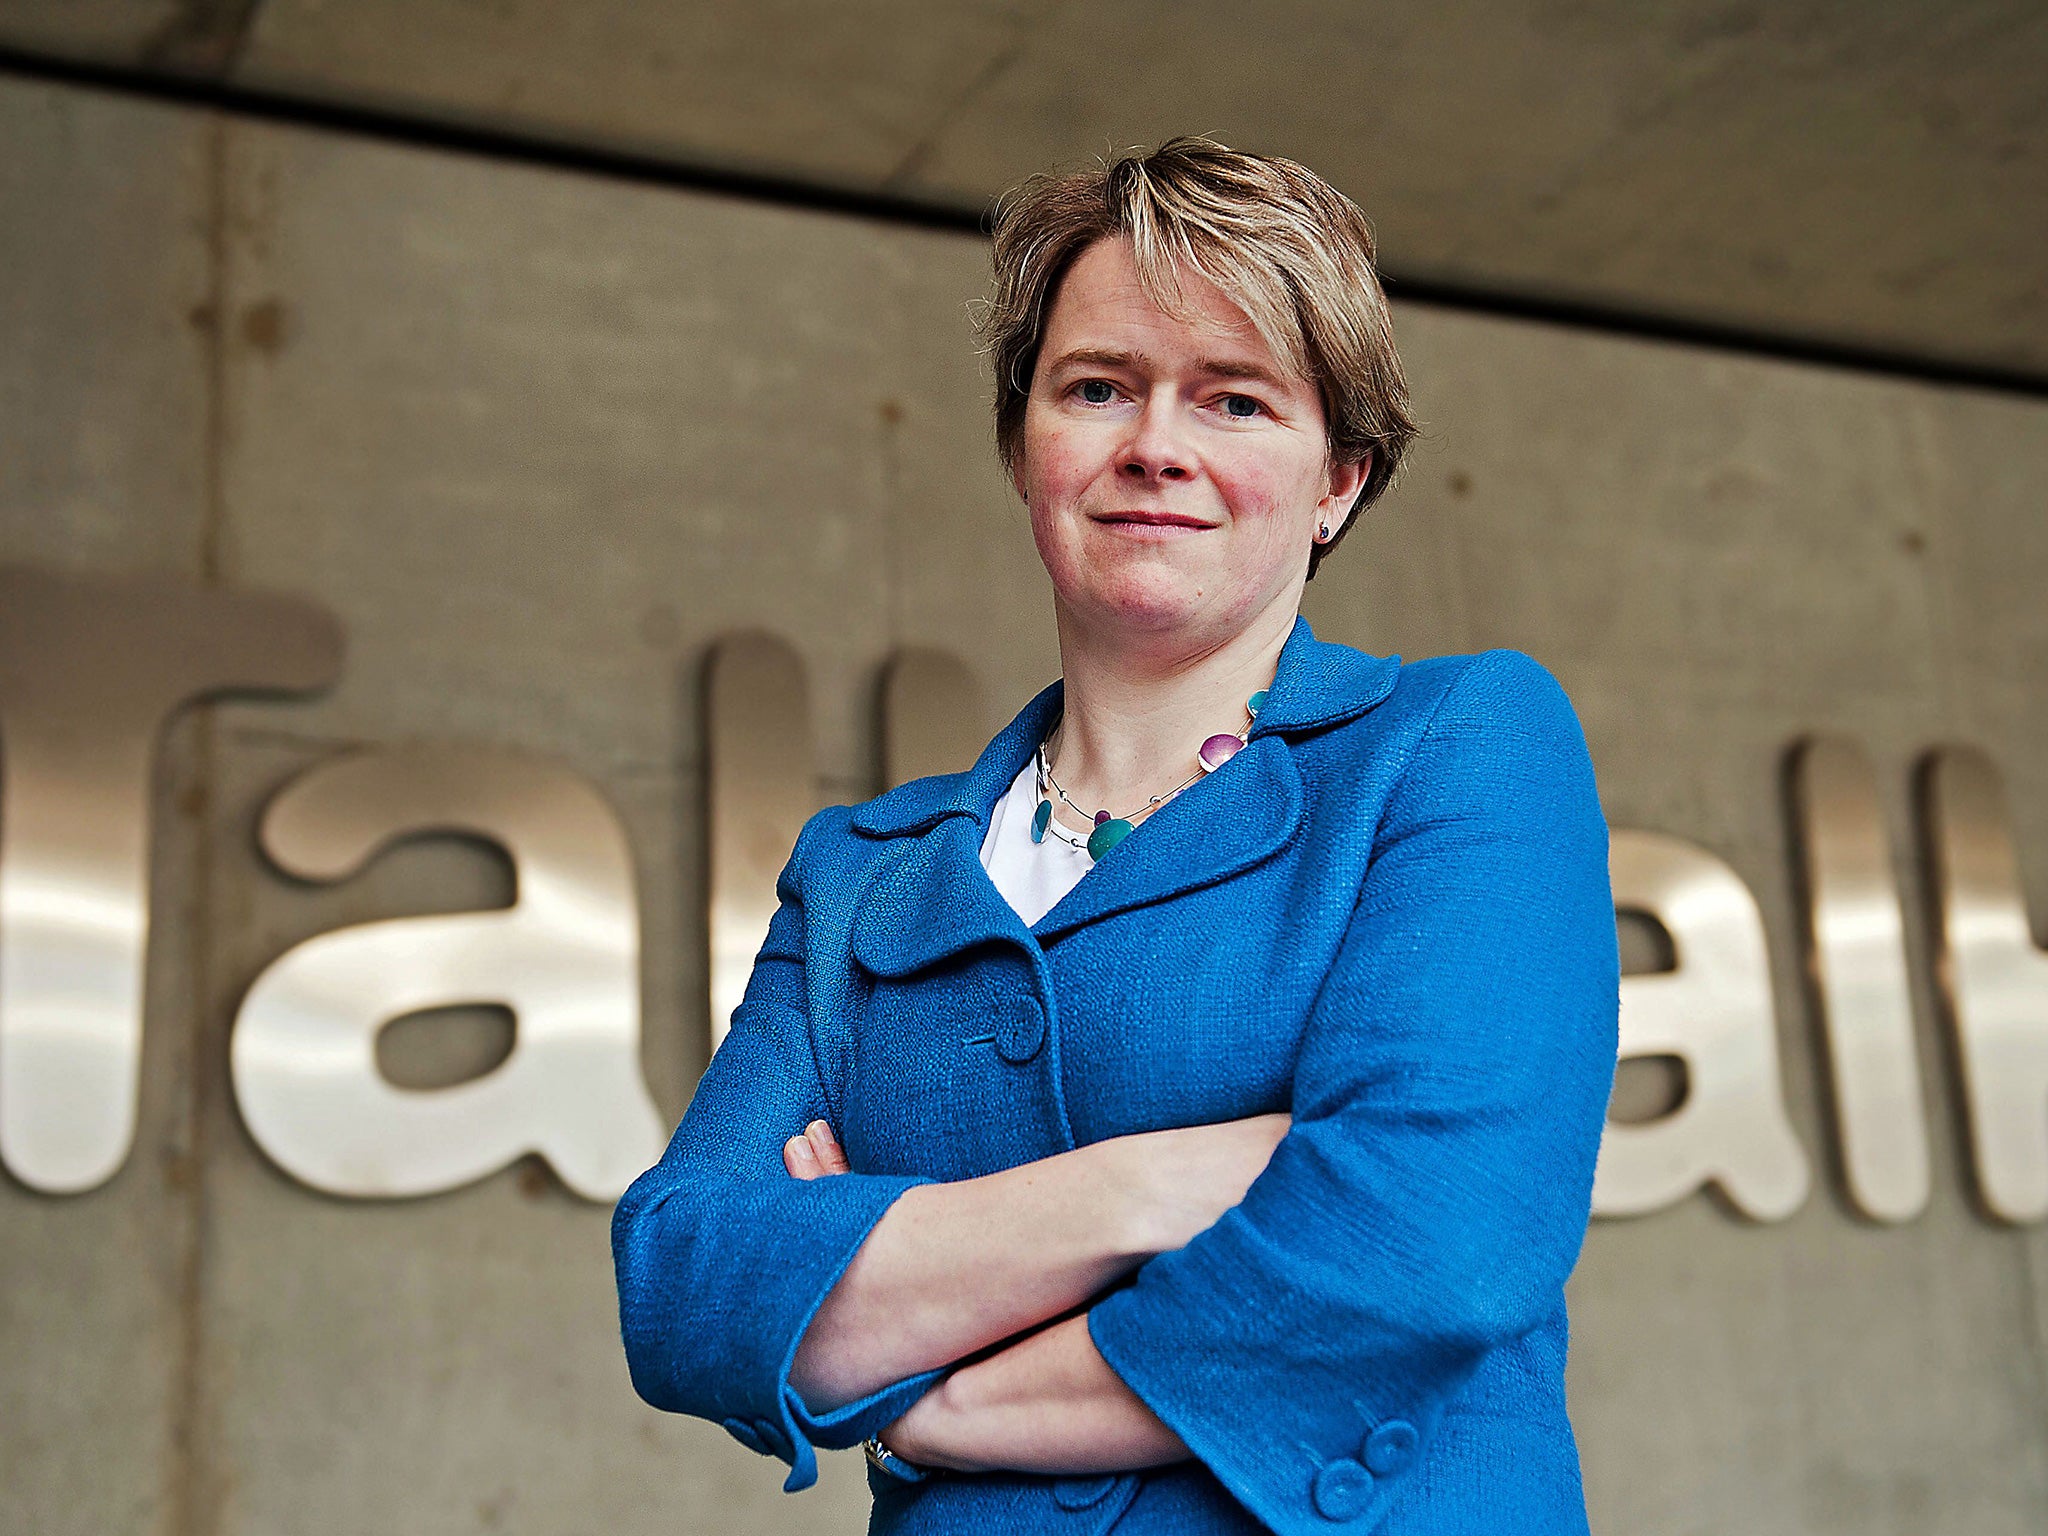 Dido Harding, chief executive of TalkTalk, estimated that one-off costs would be in the region of £30-35 million.